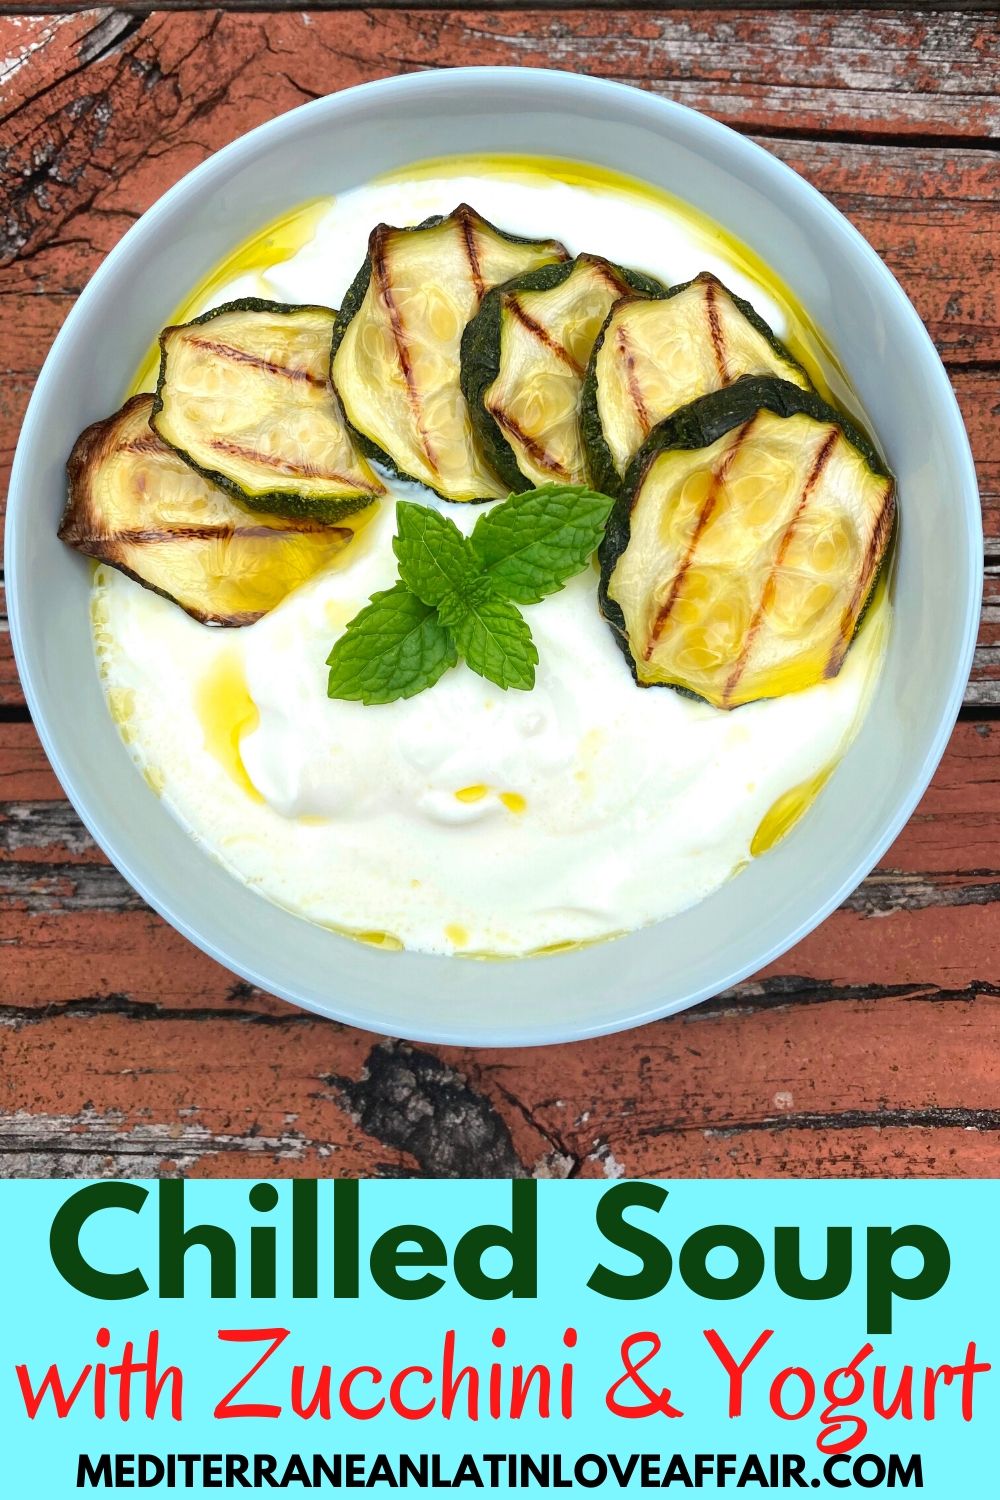 An image prepared for Pinterest with the picture of the food and the title in the bottom that reads: Chilled Soup with Zucchini & Yogurt. Picture shows a bowl of the yogurt soup garnished with zucchini slices and mint leaves.